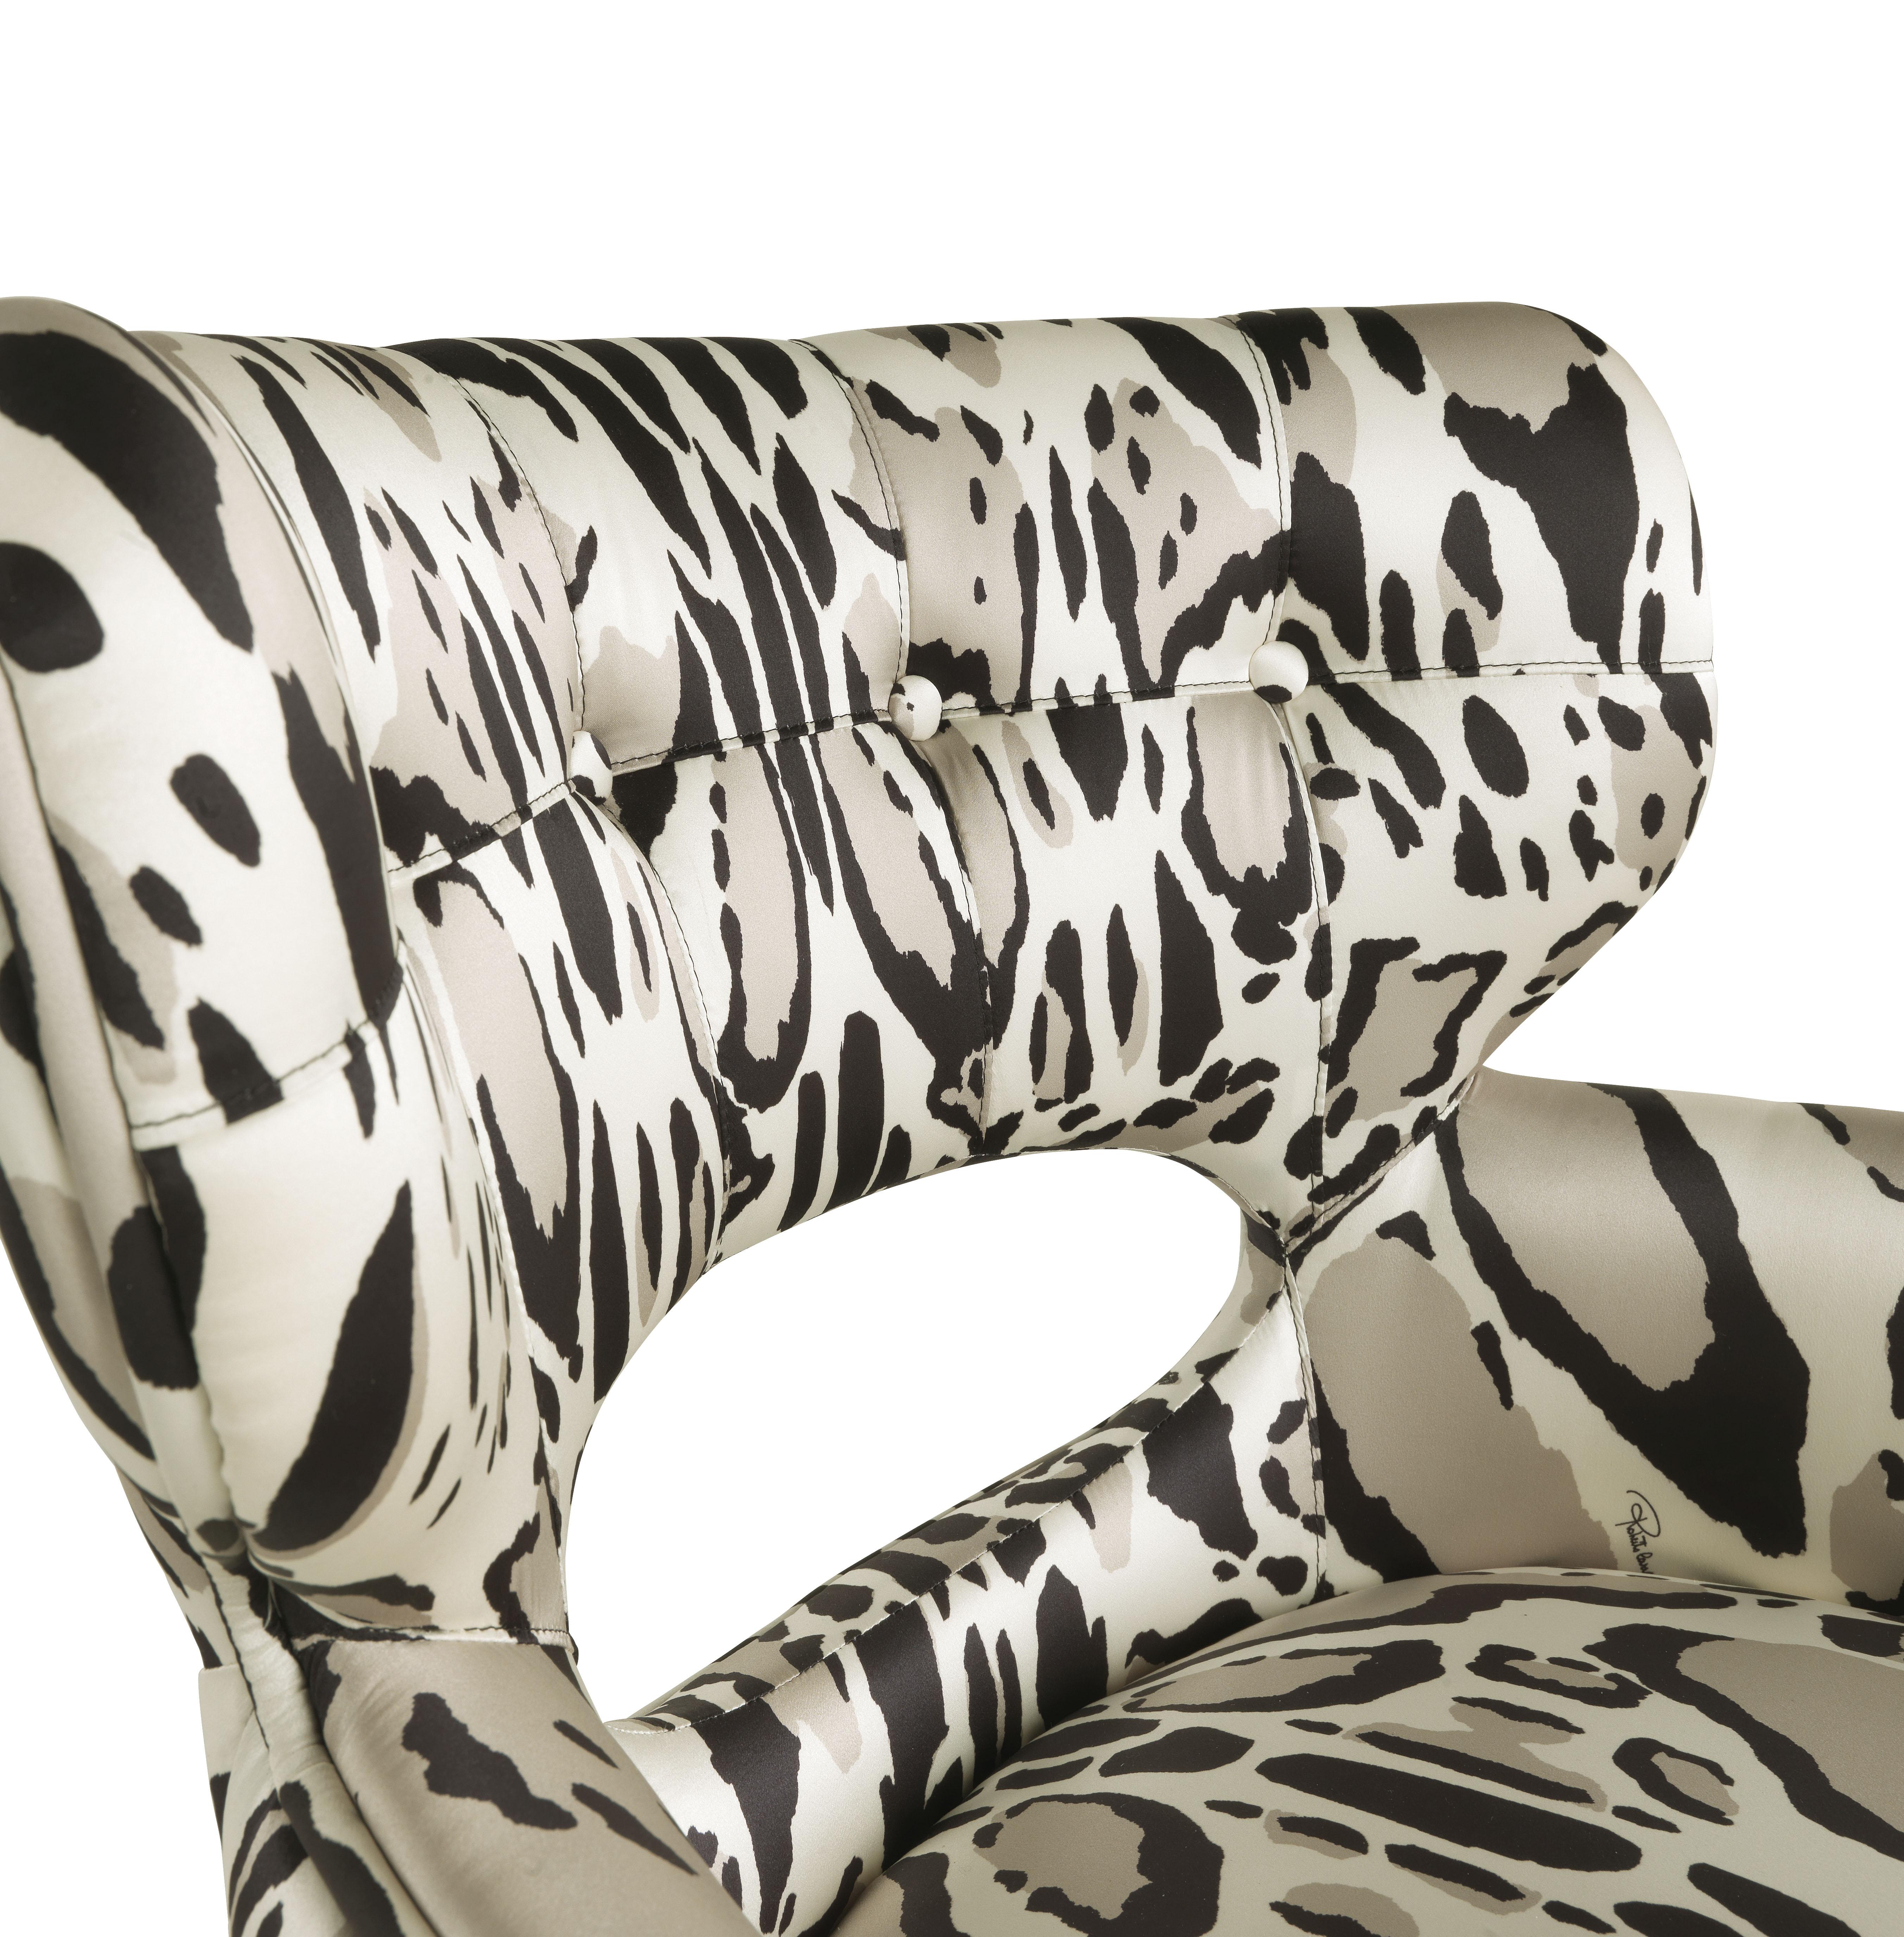 Italian 21st Century Maclaine Chair in Fabric by Roberto Cavalli Home Interiors For Sale